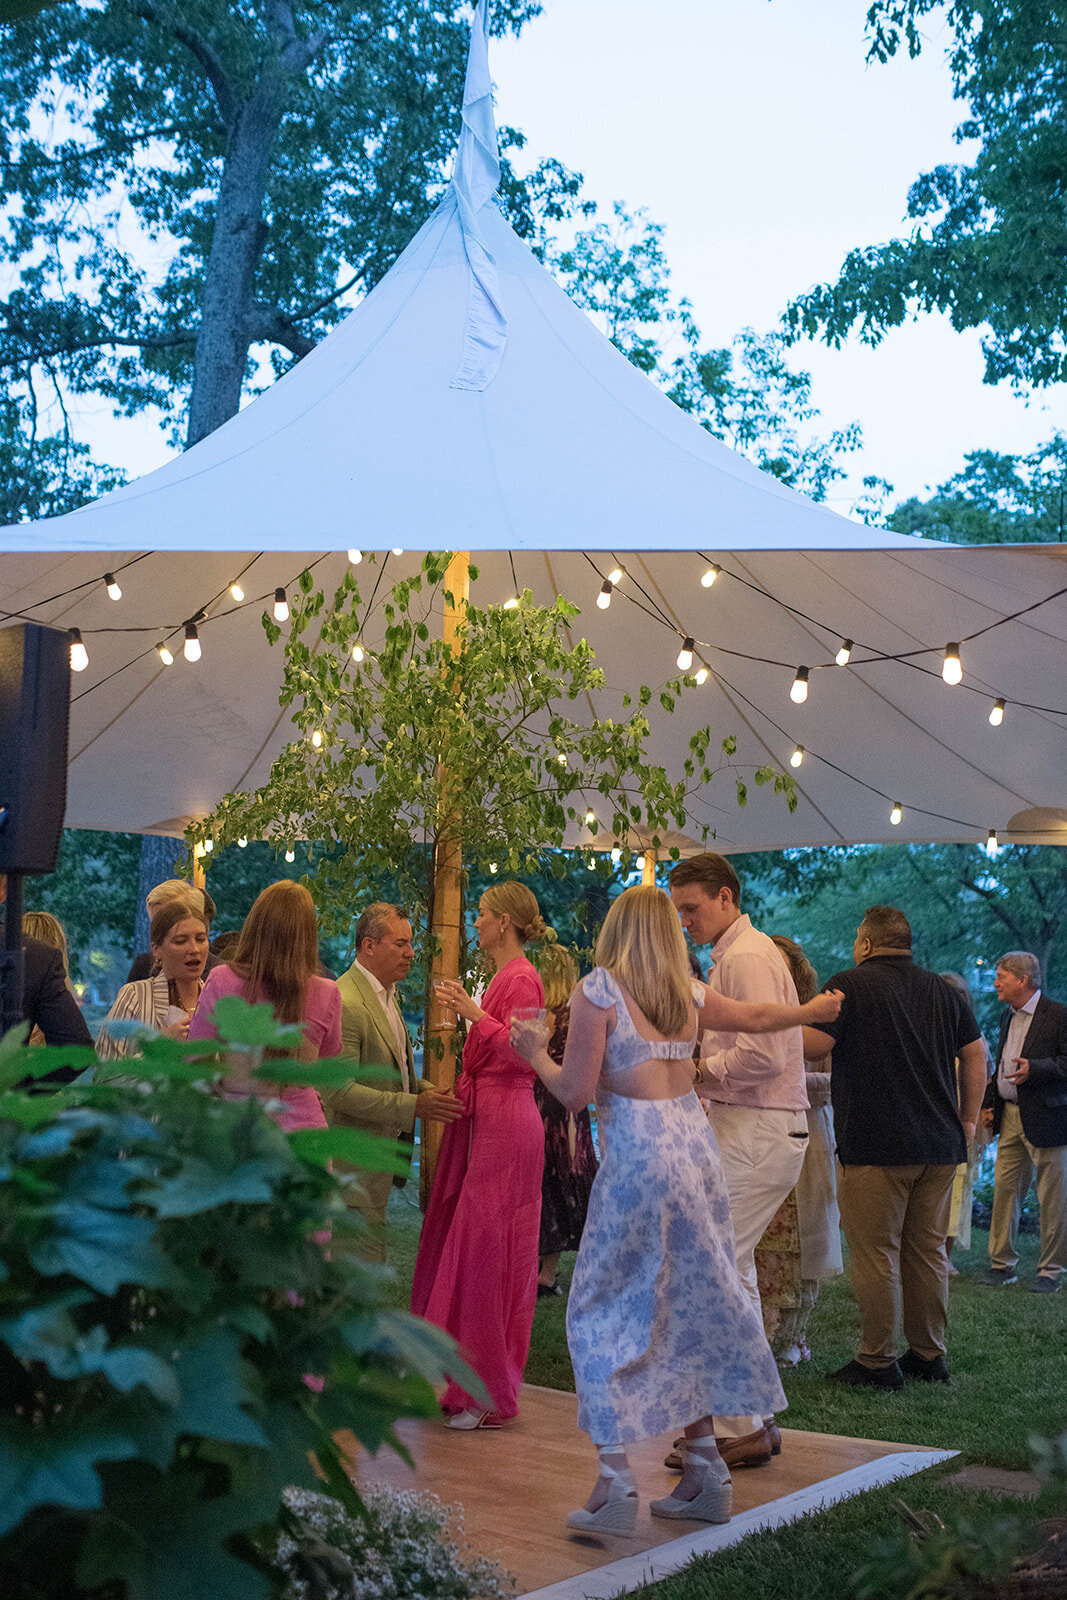 Tented backyard wedding with string lights and tree inside tent.